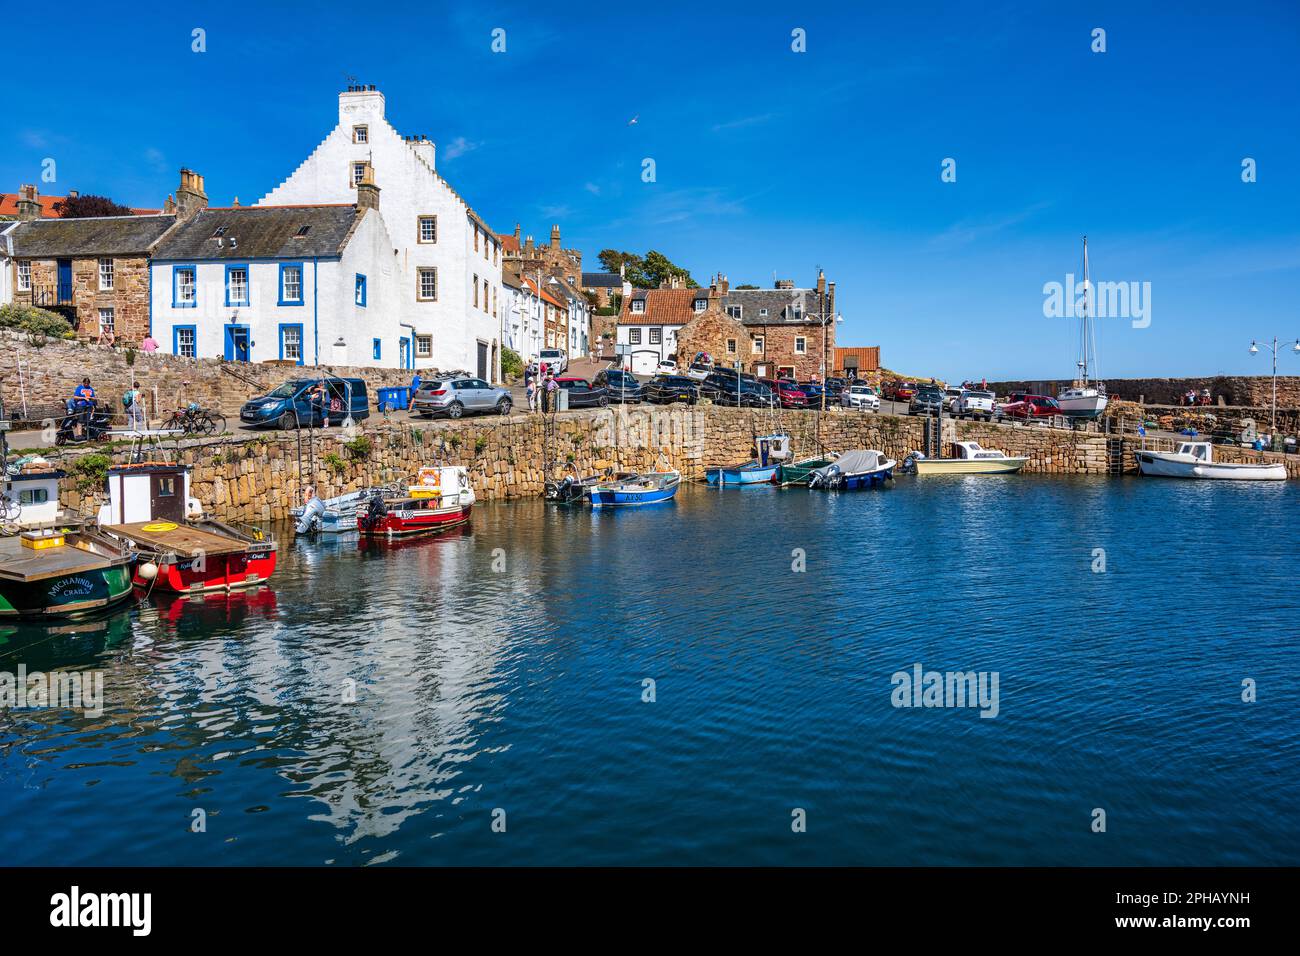 Colourful boats moored in harbour of picturesque coastal town of Crail in East Neuk of Fife, Scotland, UK Stock Photo